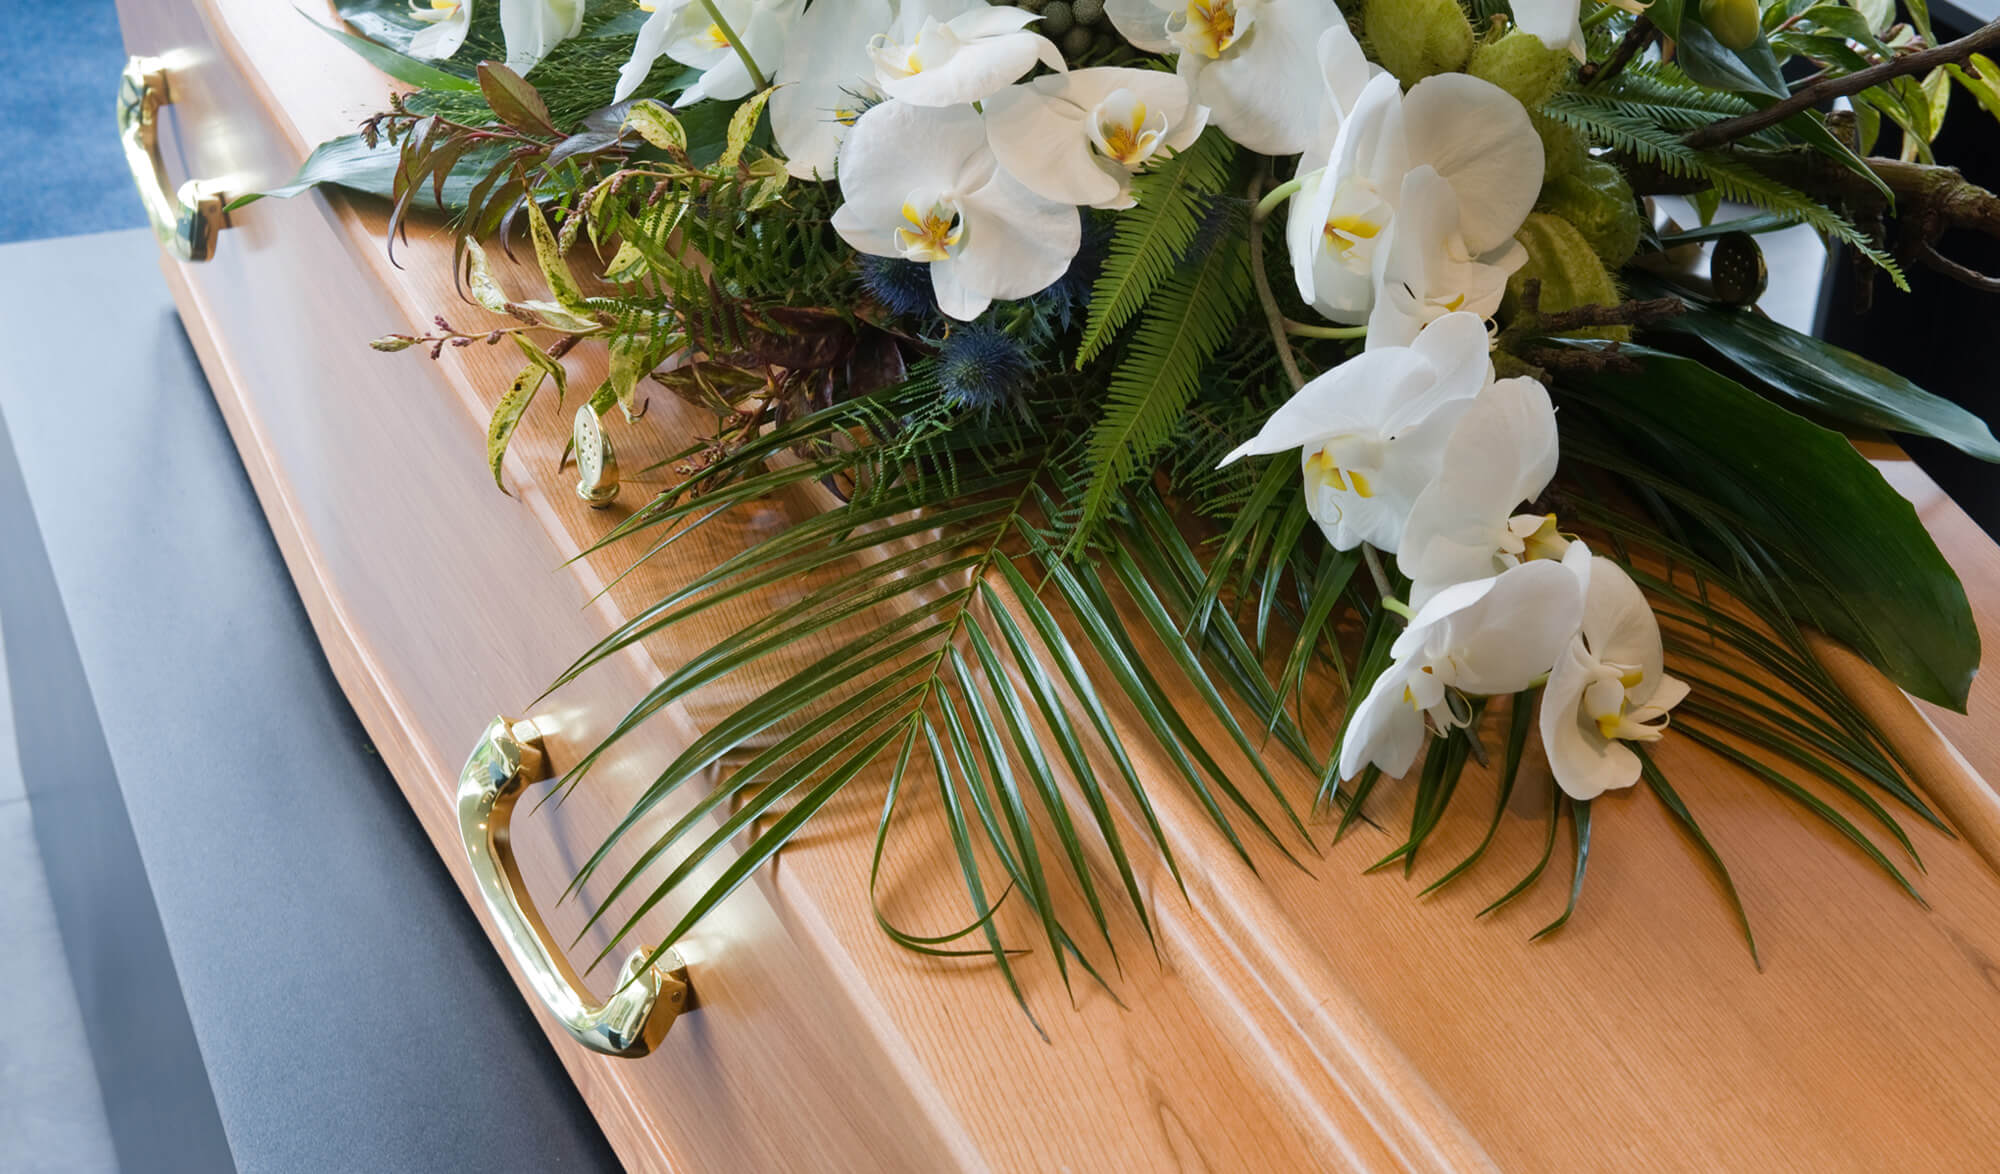 Burial Services Sydney